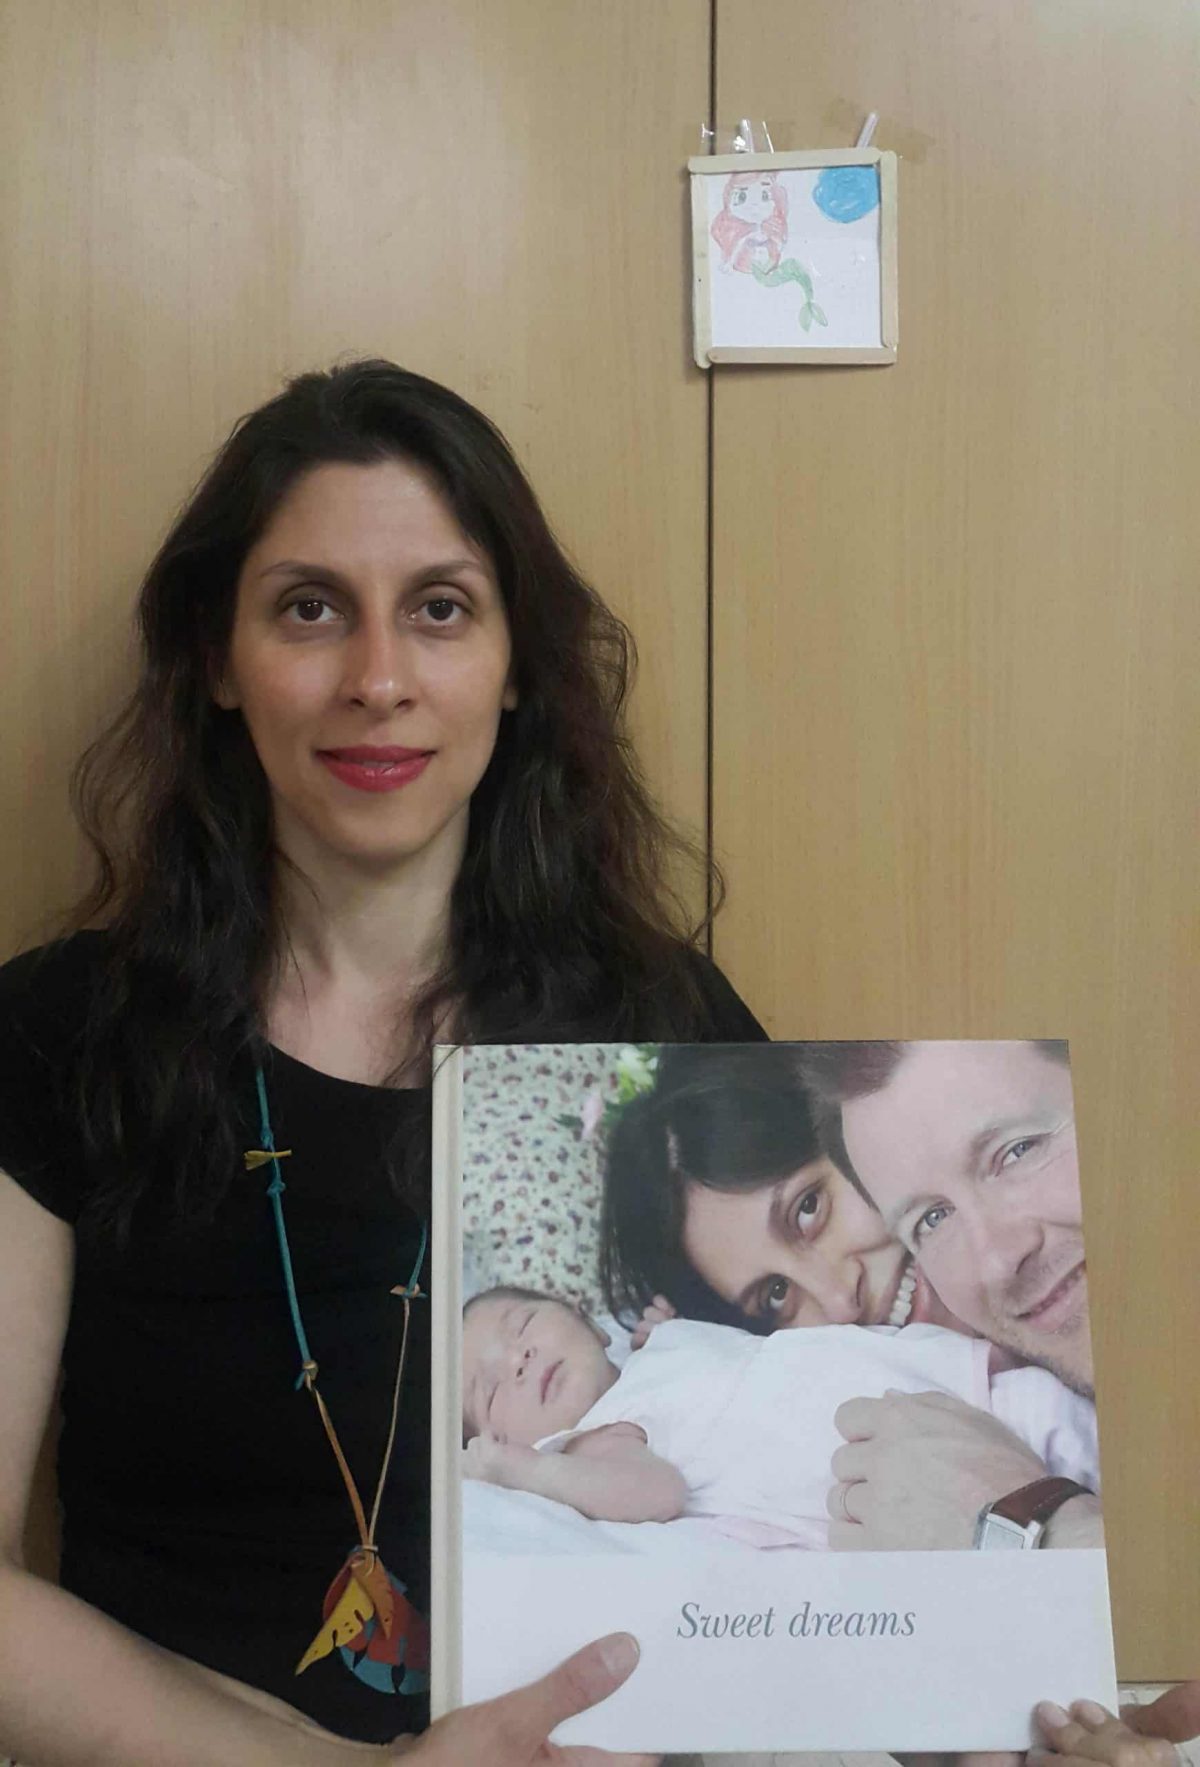 Free Nazanin Campaign handout photo of Nazanin Zaghari-Ratcliffe, the Britsh-Iranian woman jailed in Iran, after she was released temporarily on furlough for two weeks until April 4 by the government in Tehran because of the coronavirus outbreak, her husband said.